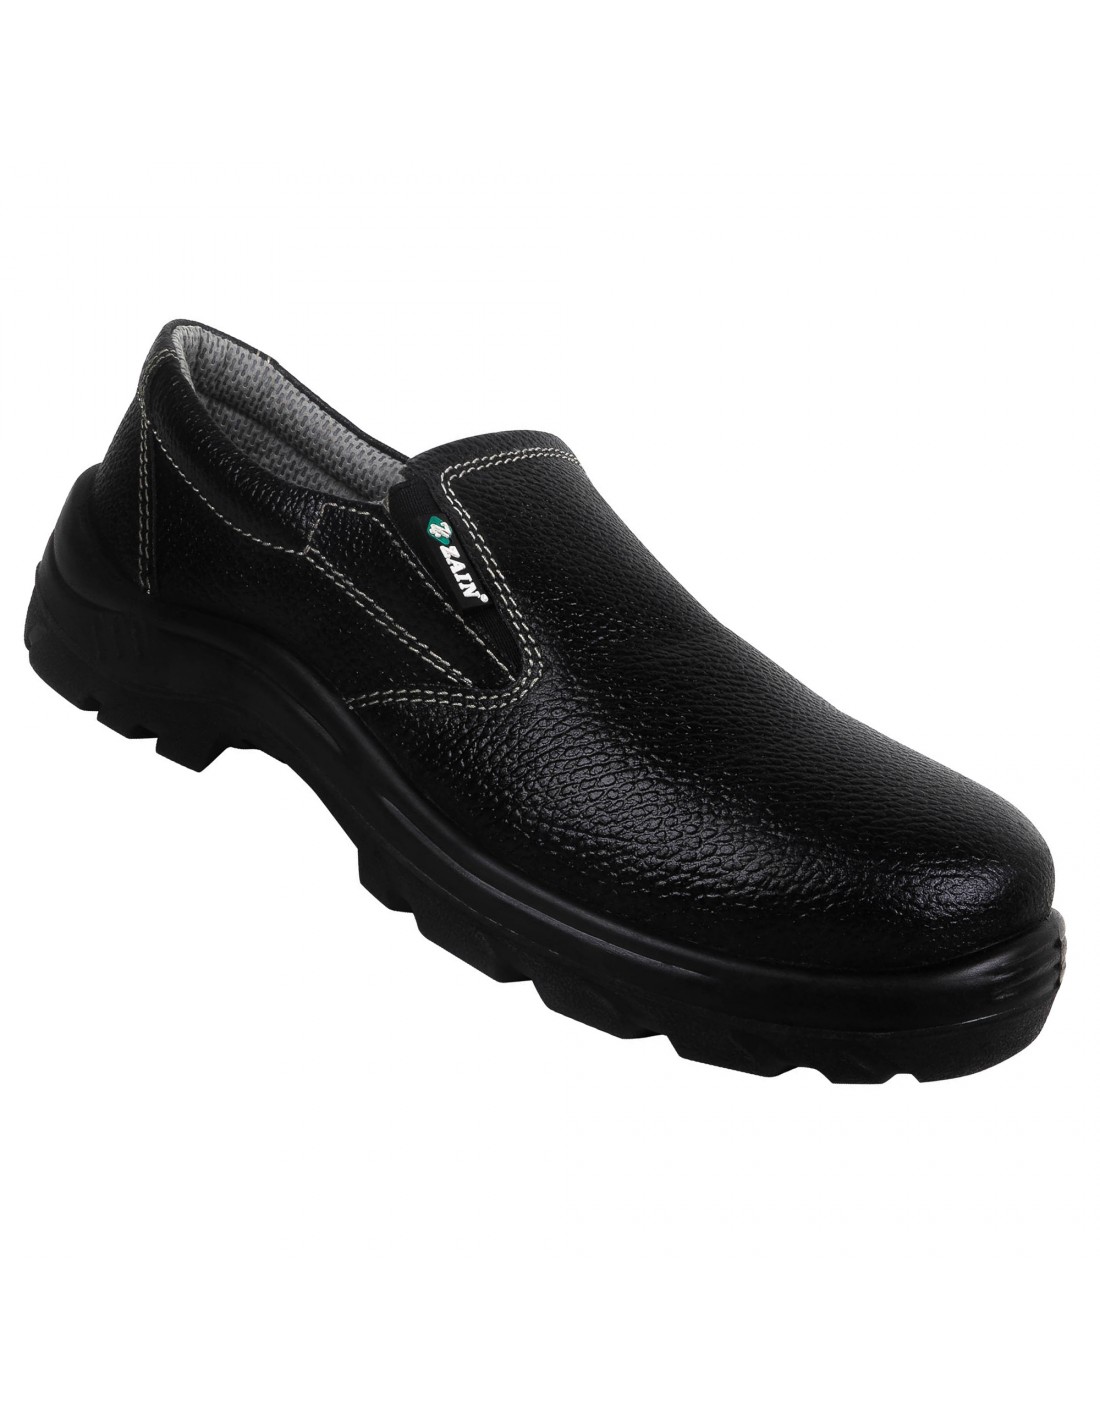 zain safety shoes